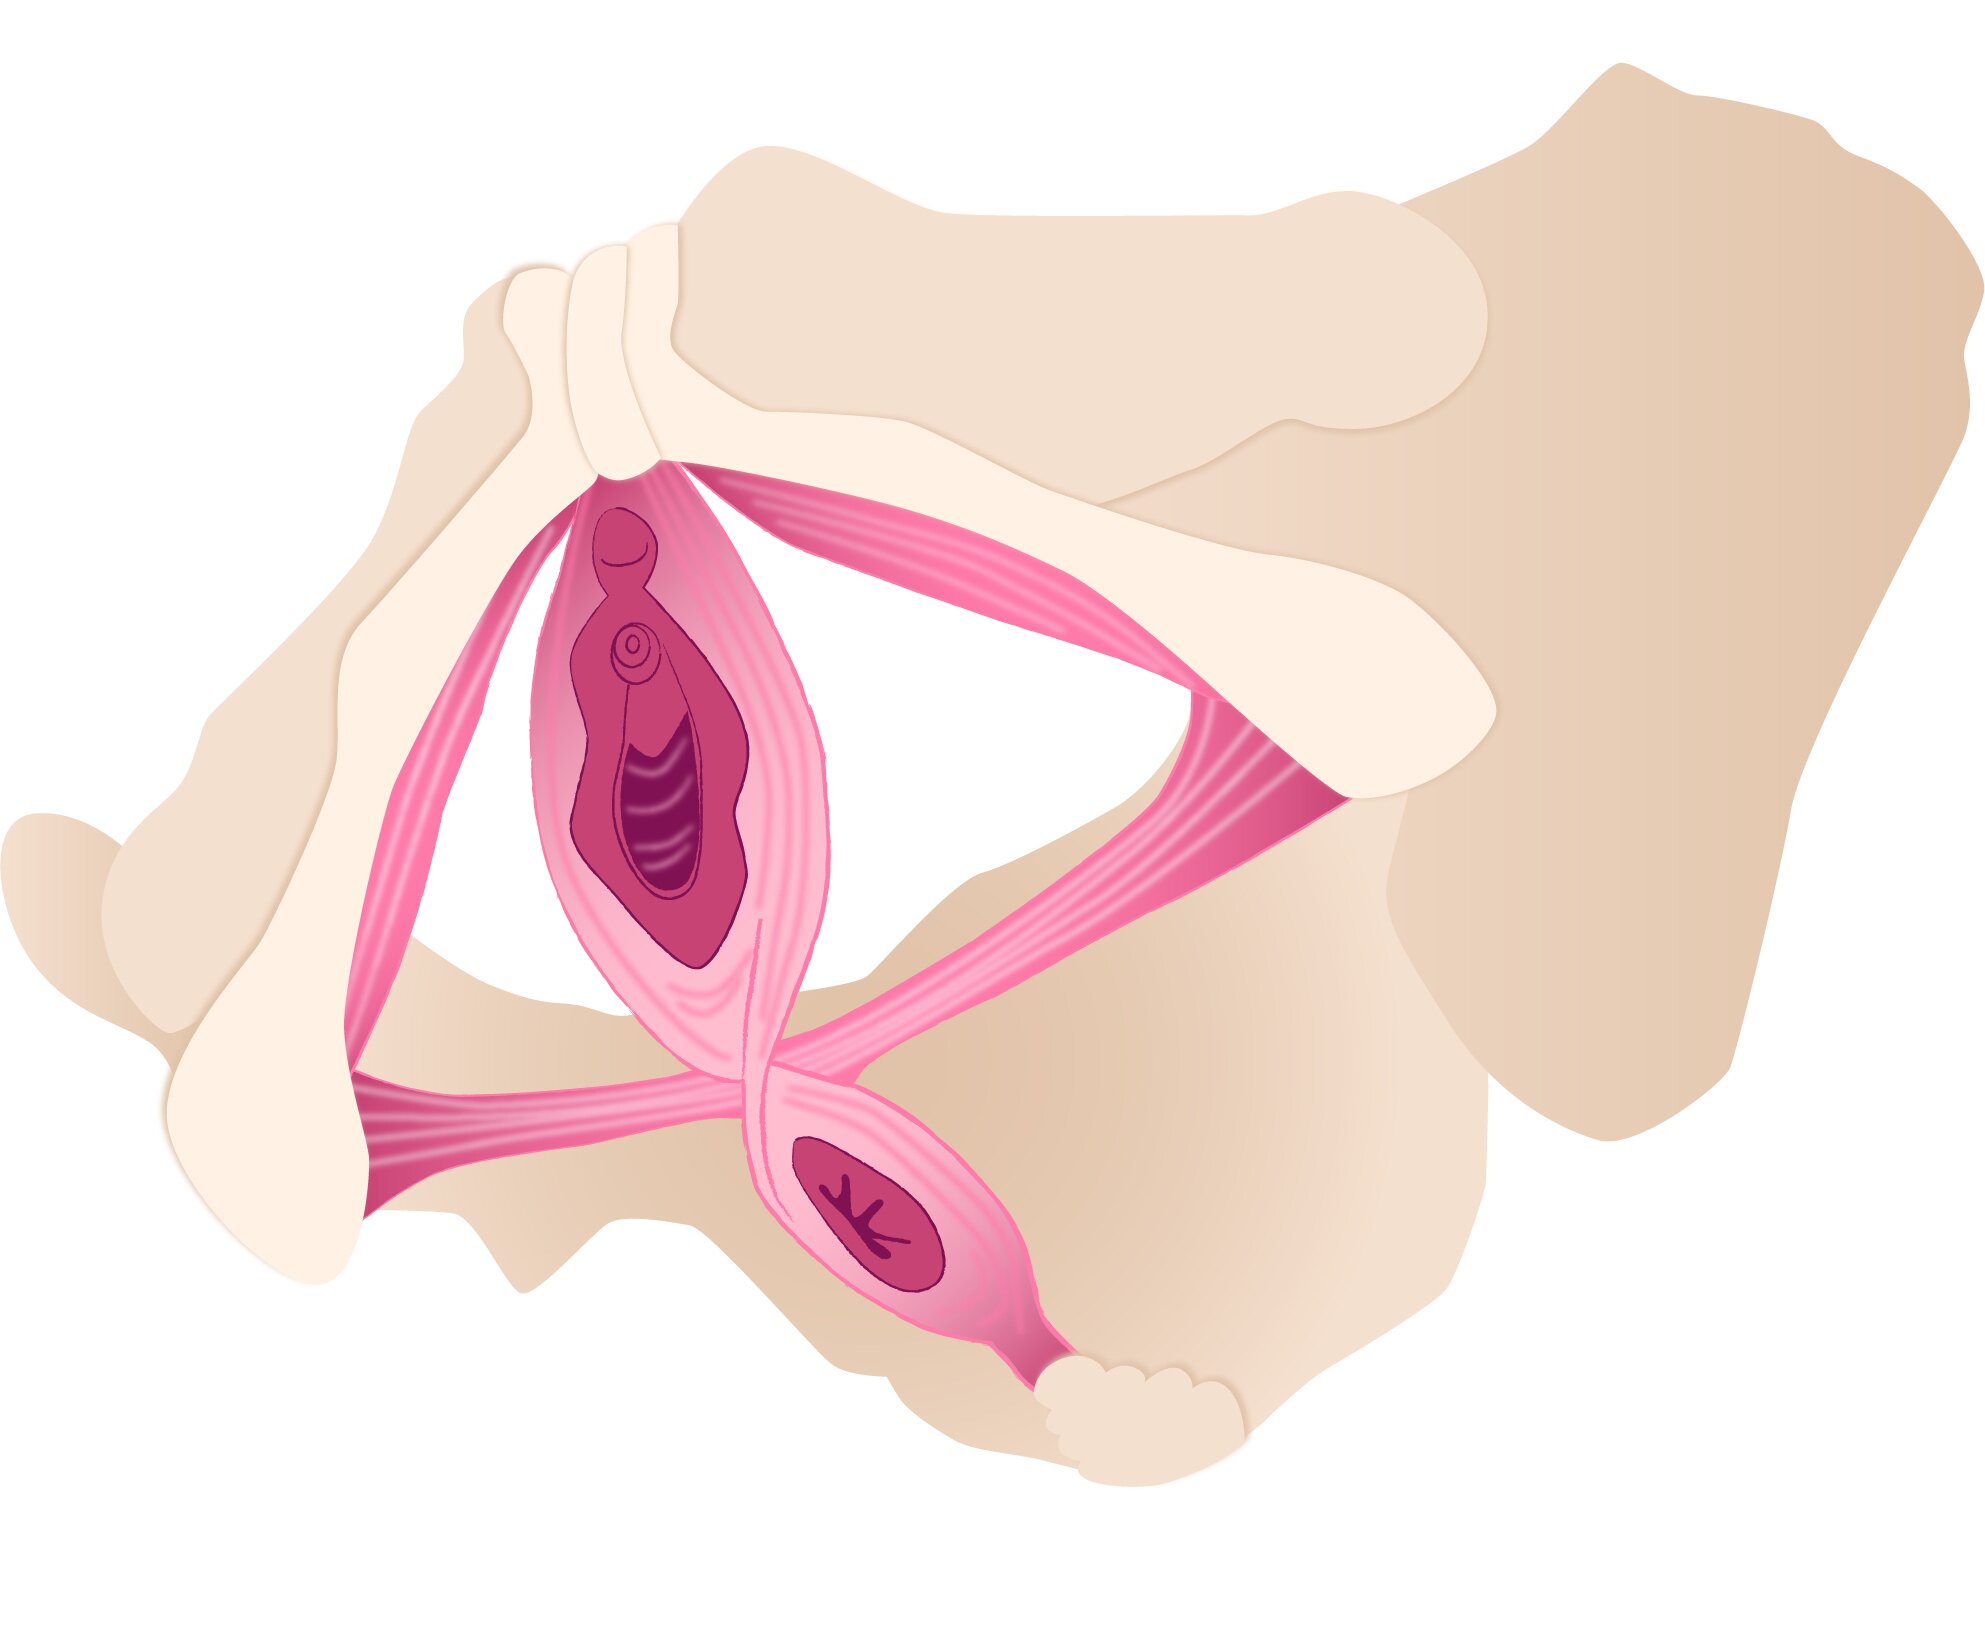 First layer of the pelvic floor muscles